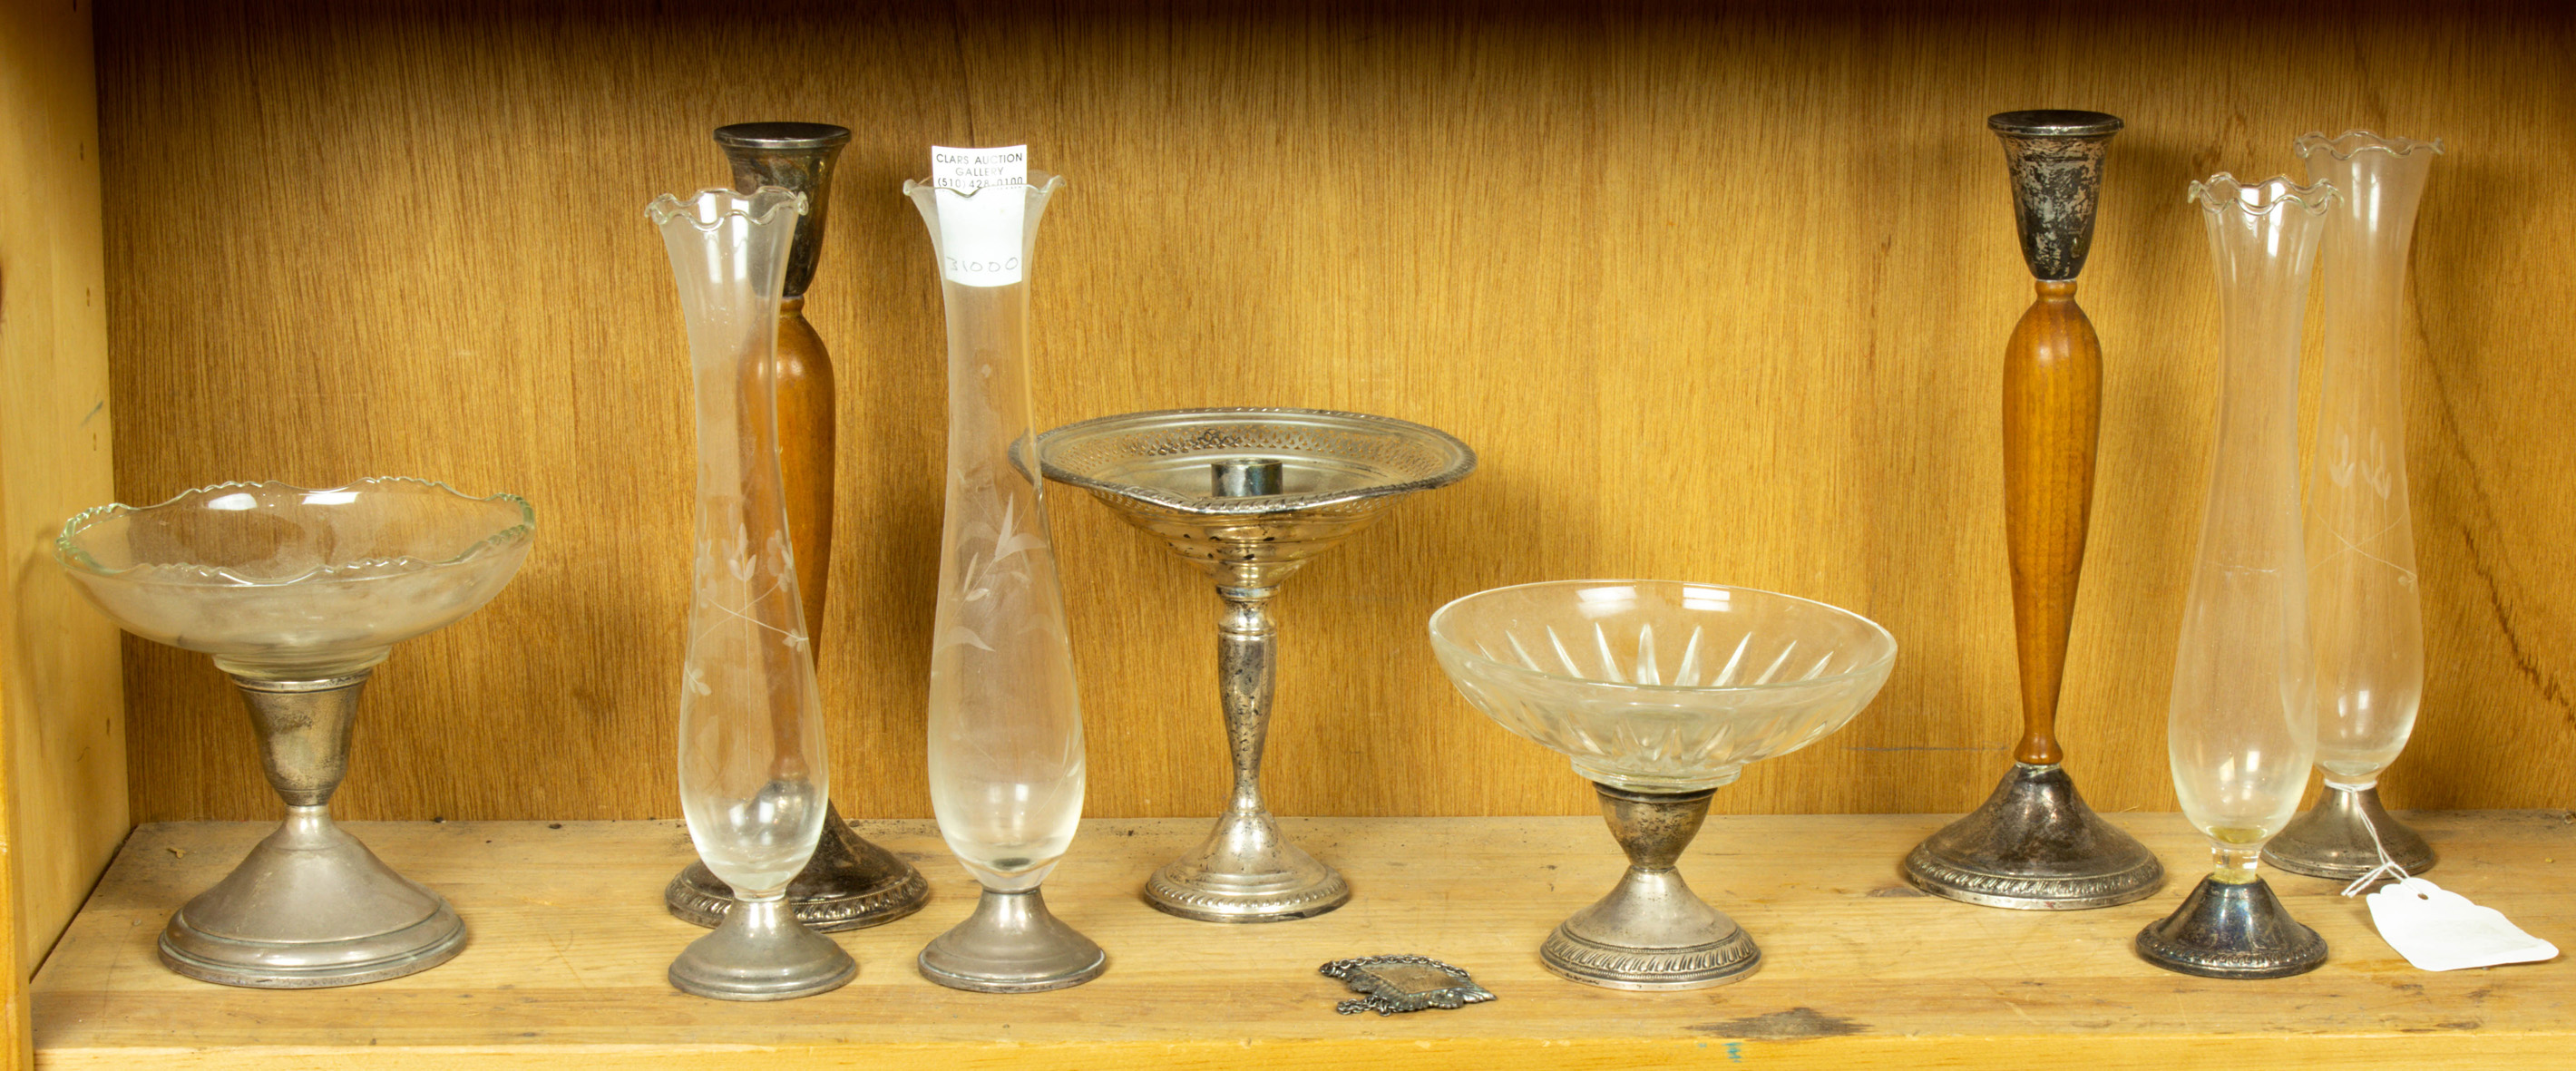 ONE SHELF OF COMPOTES AND VASES 2d1f12